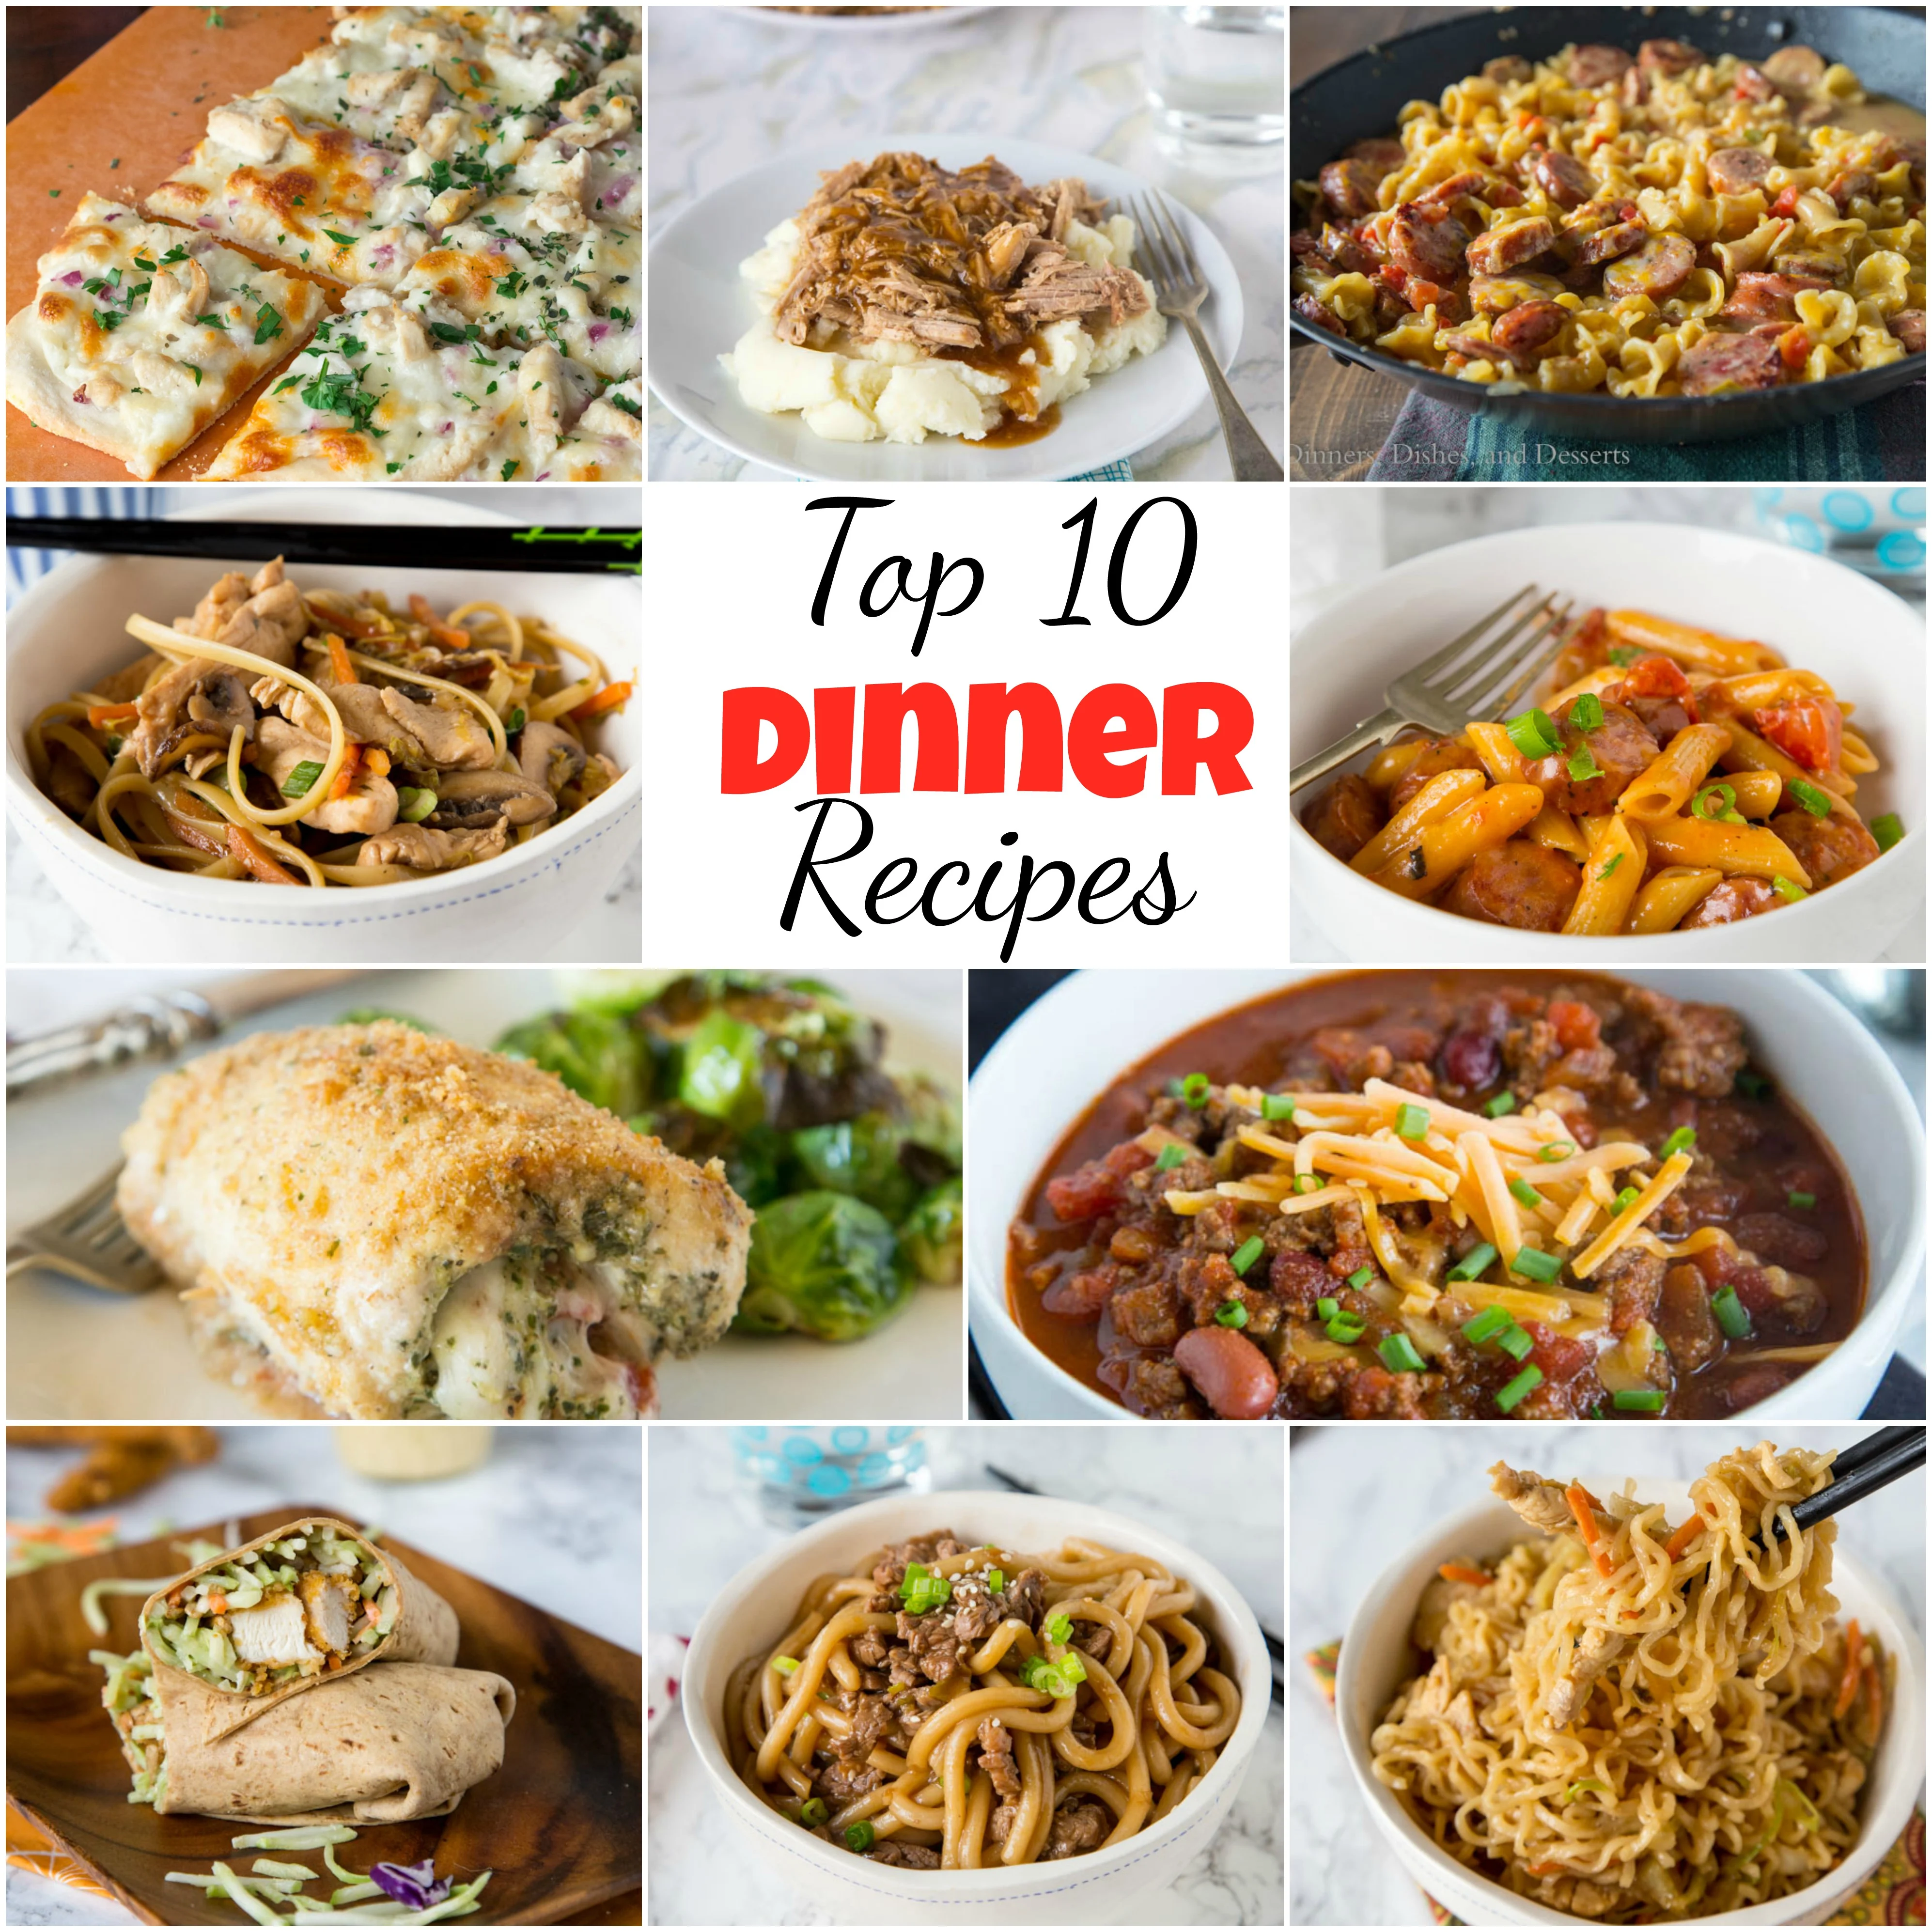 Top 10 Dinner Recipes - Find the 10 most viewed Easy Dinner Recipes on the blog of 2017. Asian, Mexican, Chicken, Beef; we have it all covered. And they are all easy, fast, and kid friendly!